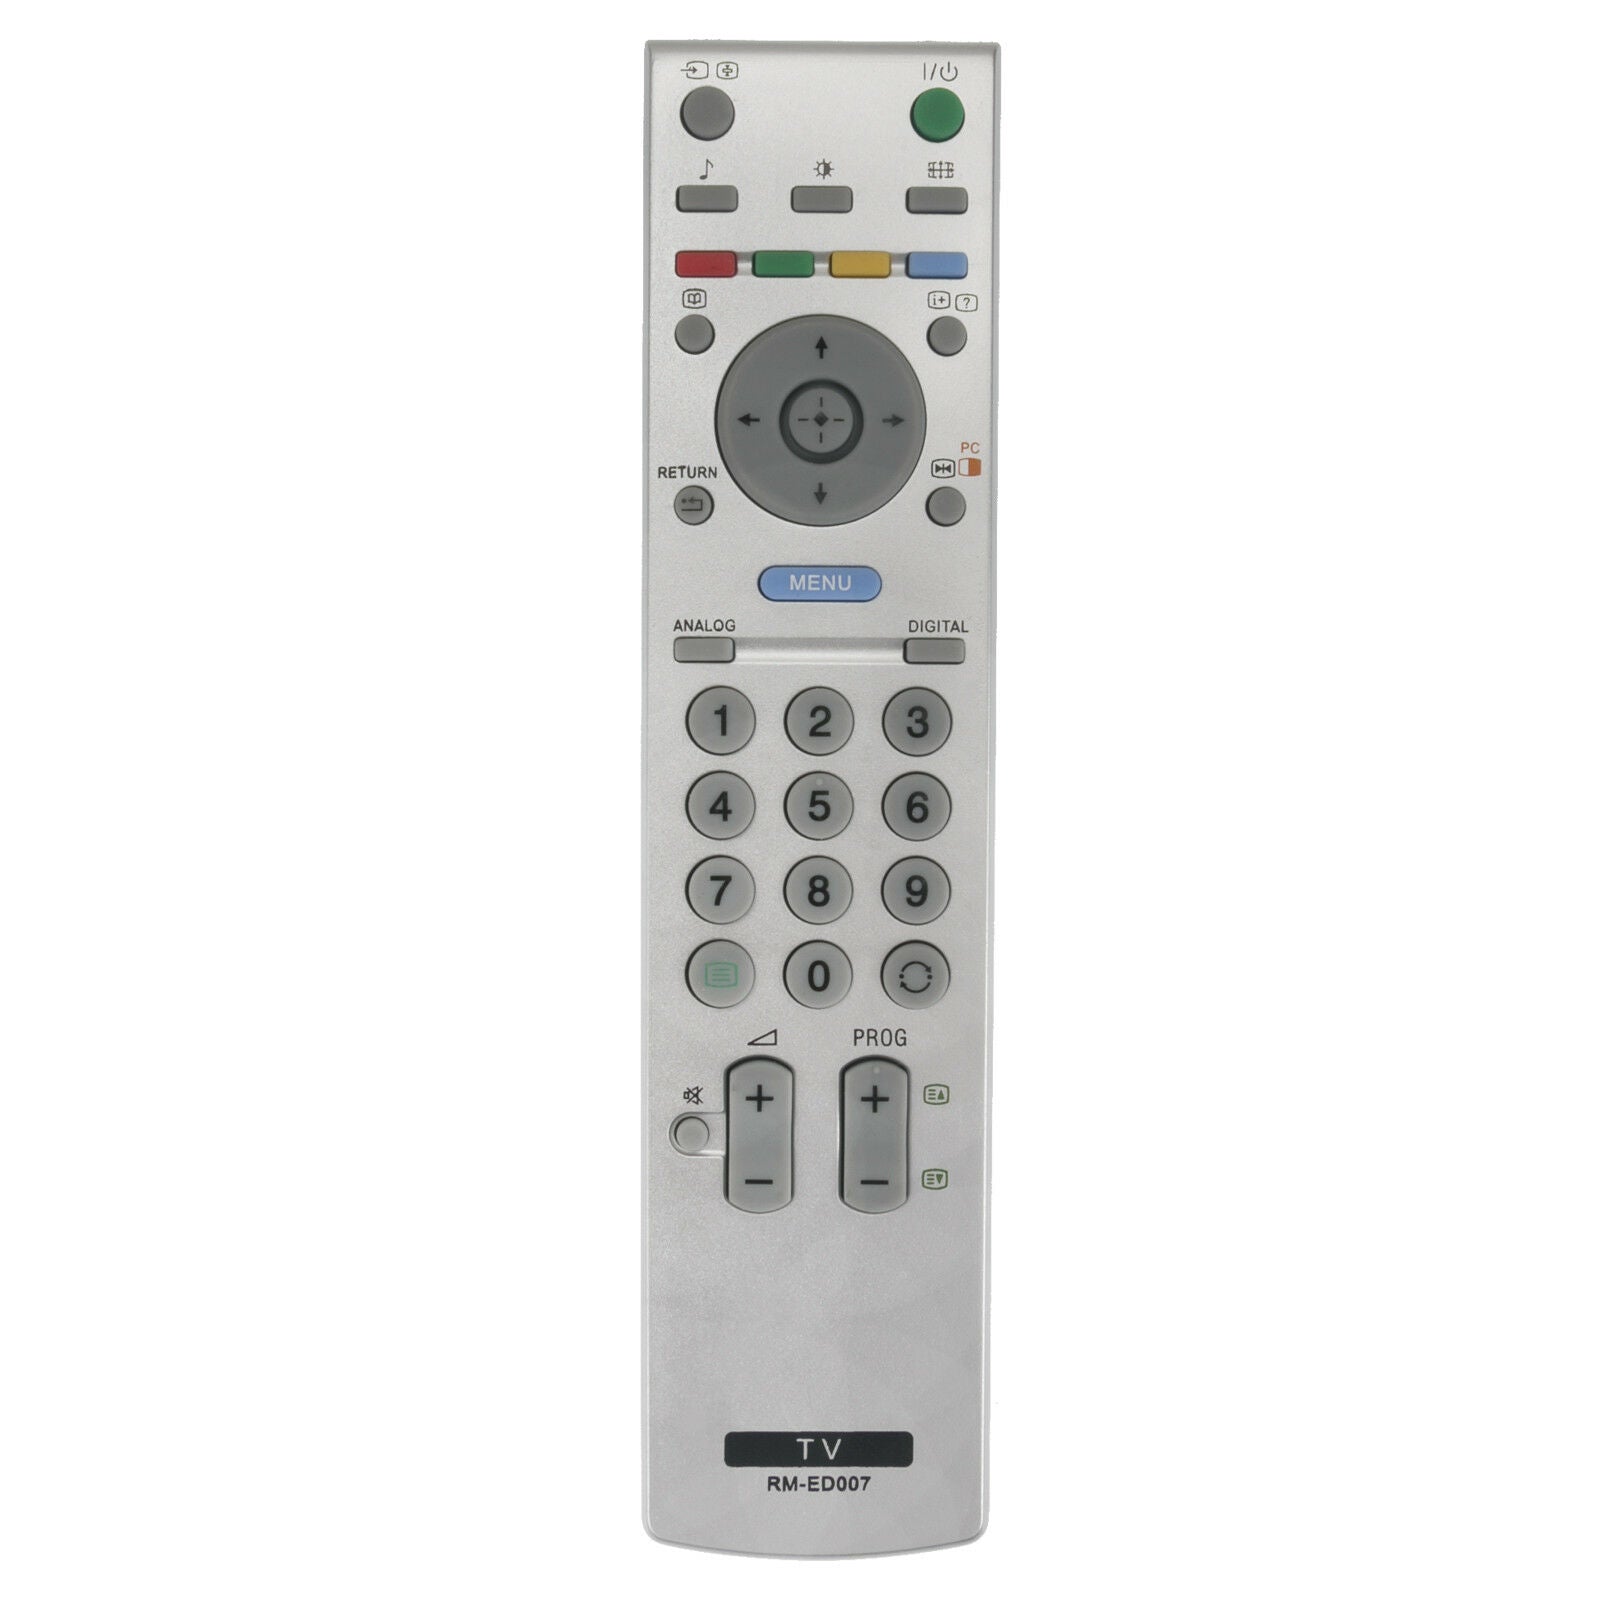 RM-ED007 Replacement Remote Control for Sony KDL-26U2000 KDL-32U2000